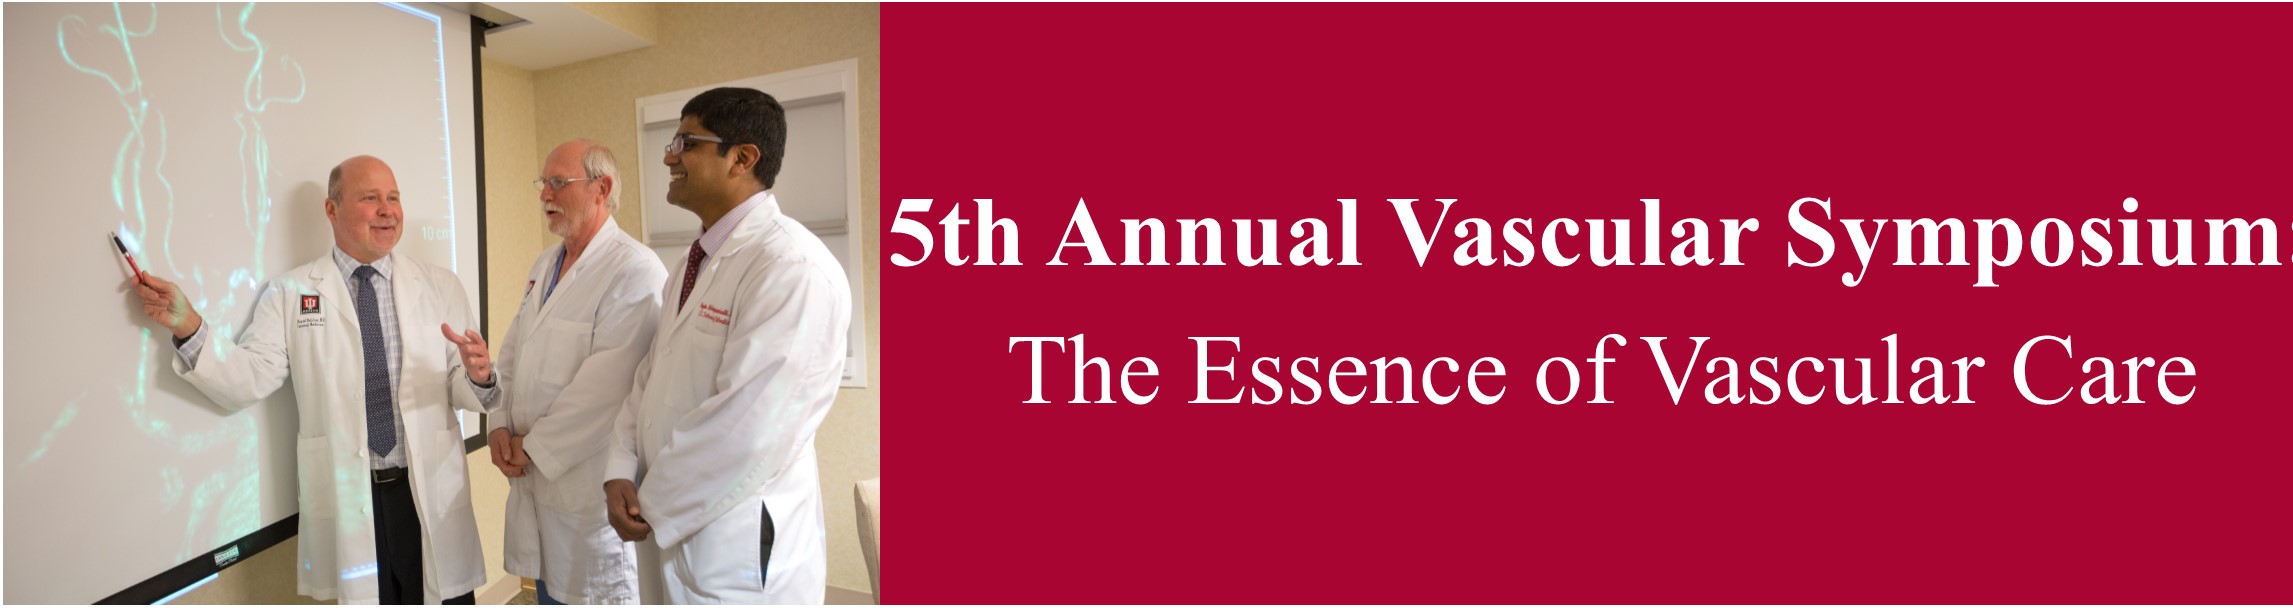 5th Annual Vascular Symposium: The Essence of Vascular Care Banner